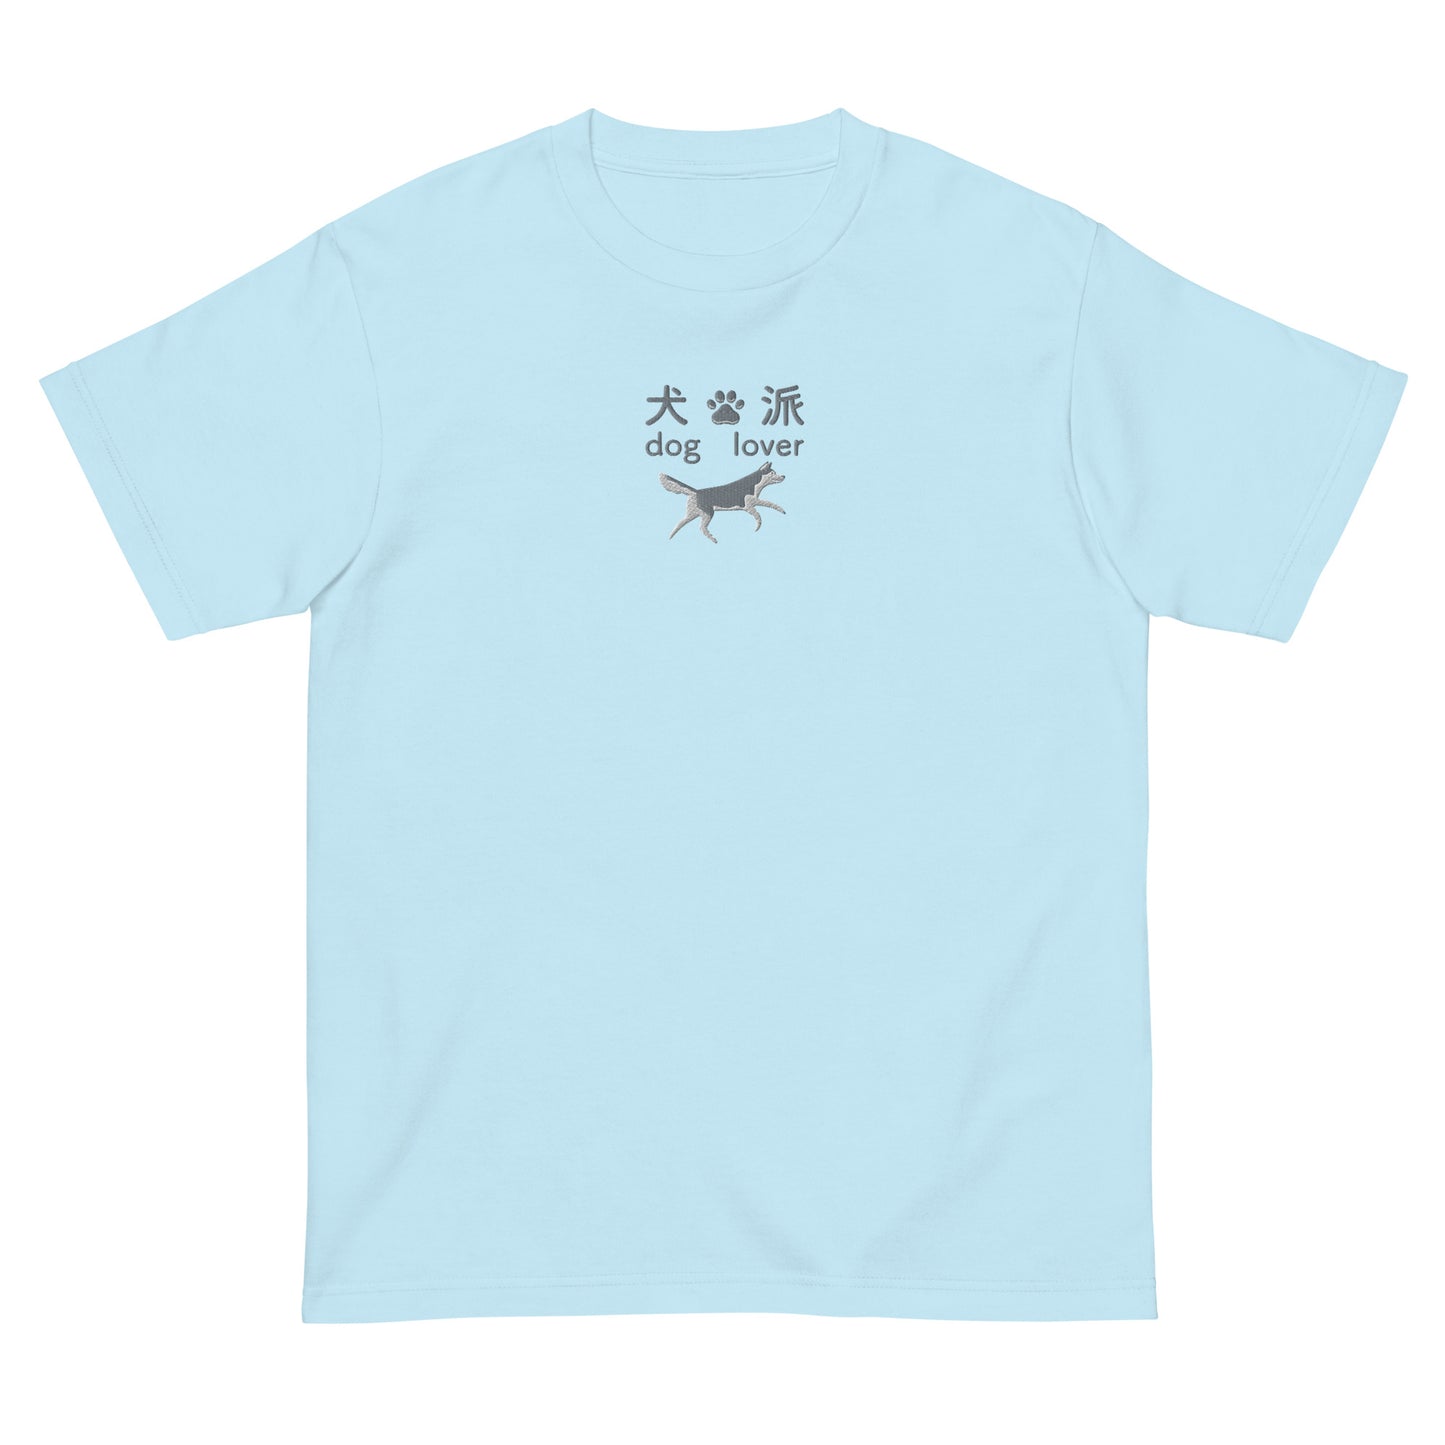 Light Blue High Quality Tee - Front Design with an Gray, White Embroidery "Dog Lover" in Japanese,Chinese and English, and Dog Embroidery